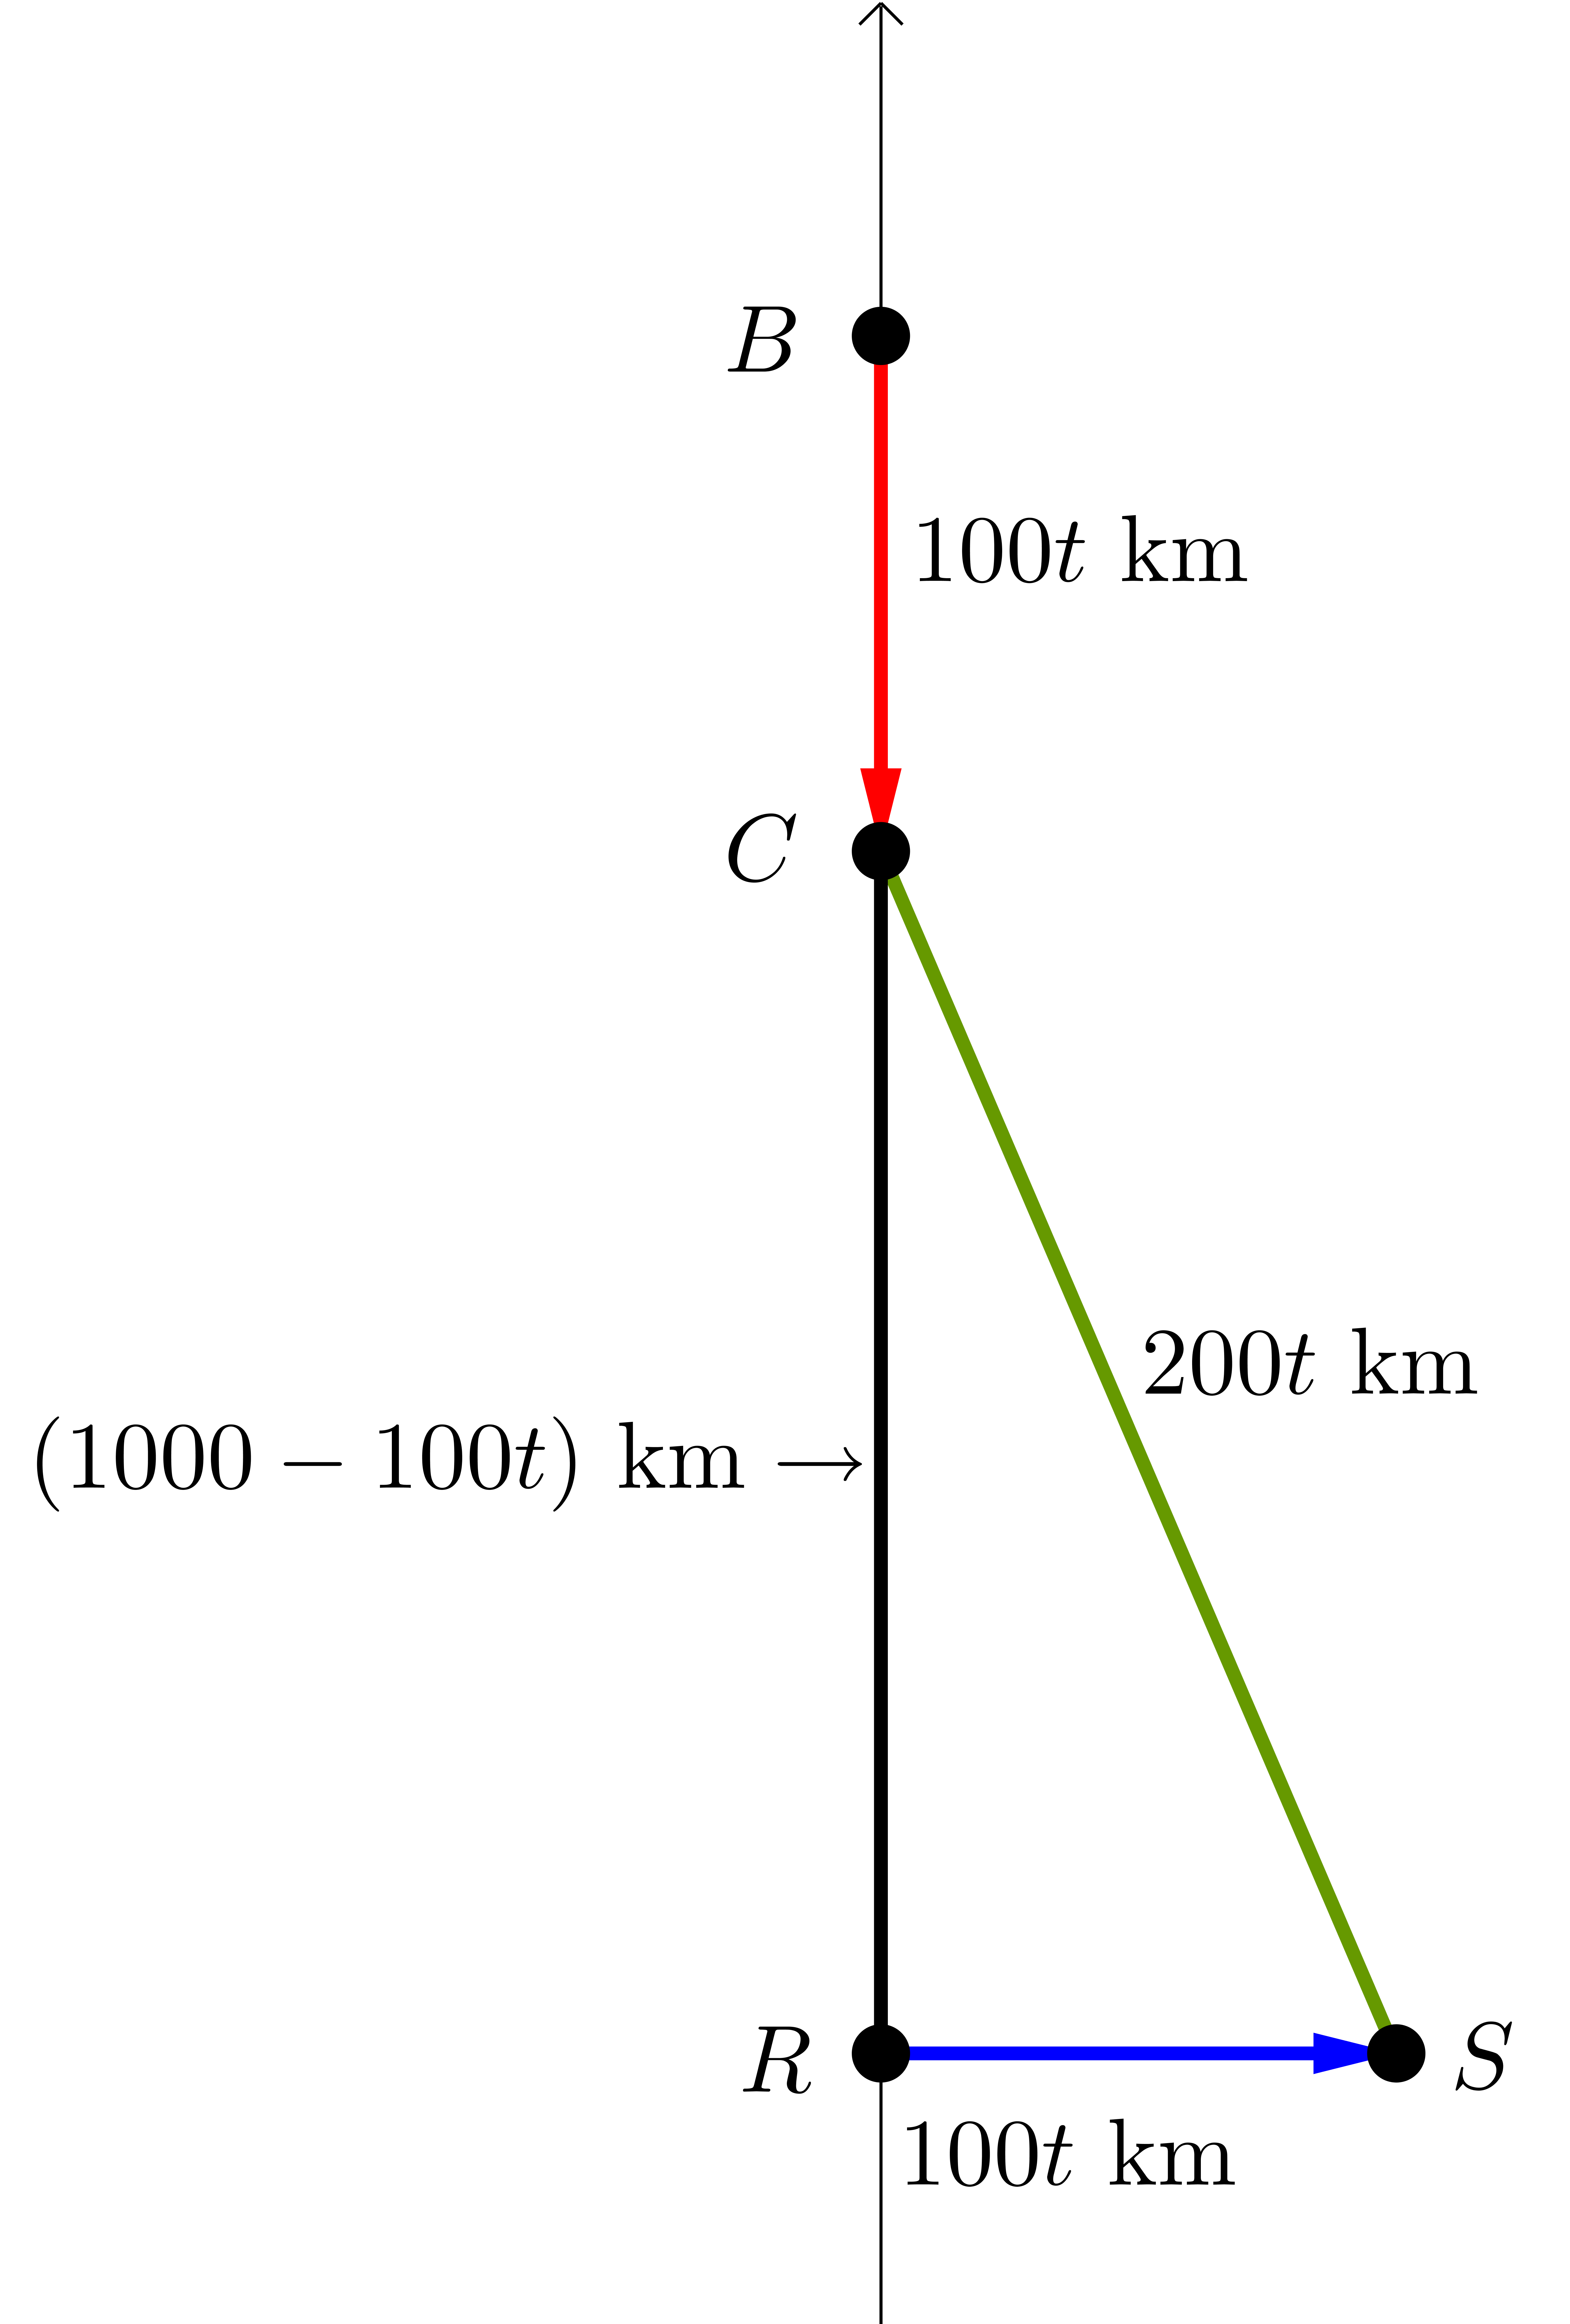 Points B, C, and R are plotted on a vertical axis. Point S is east of point R.